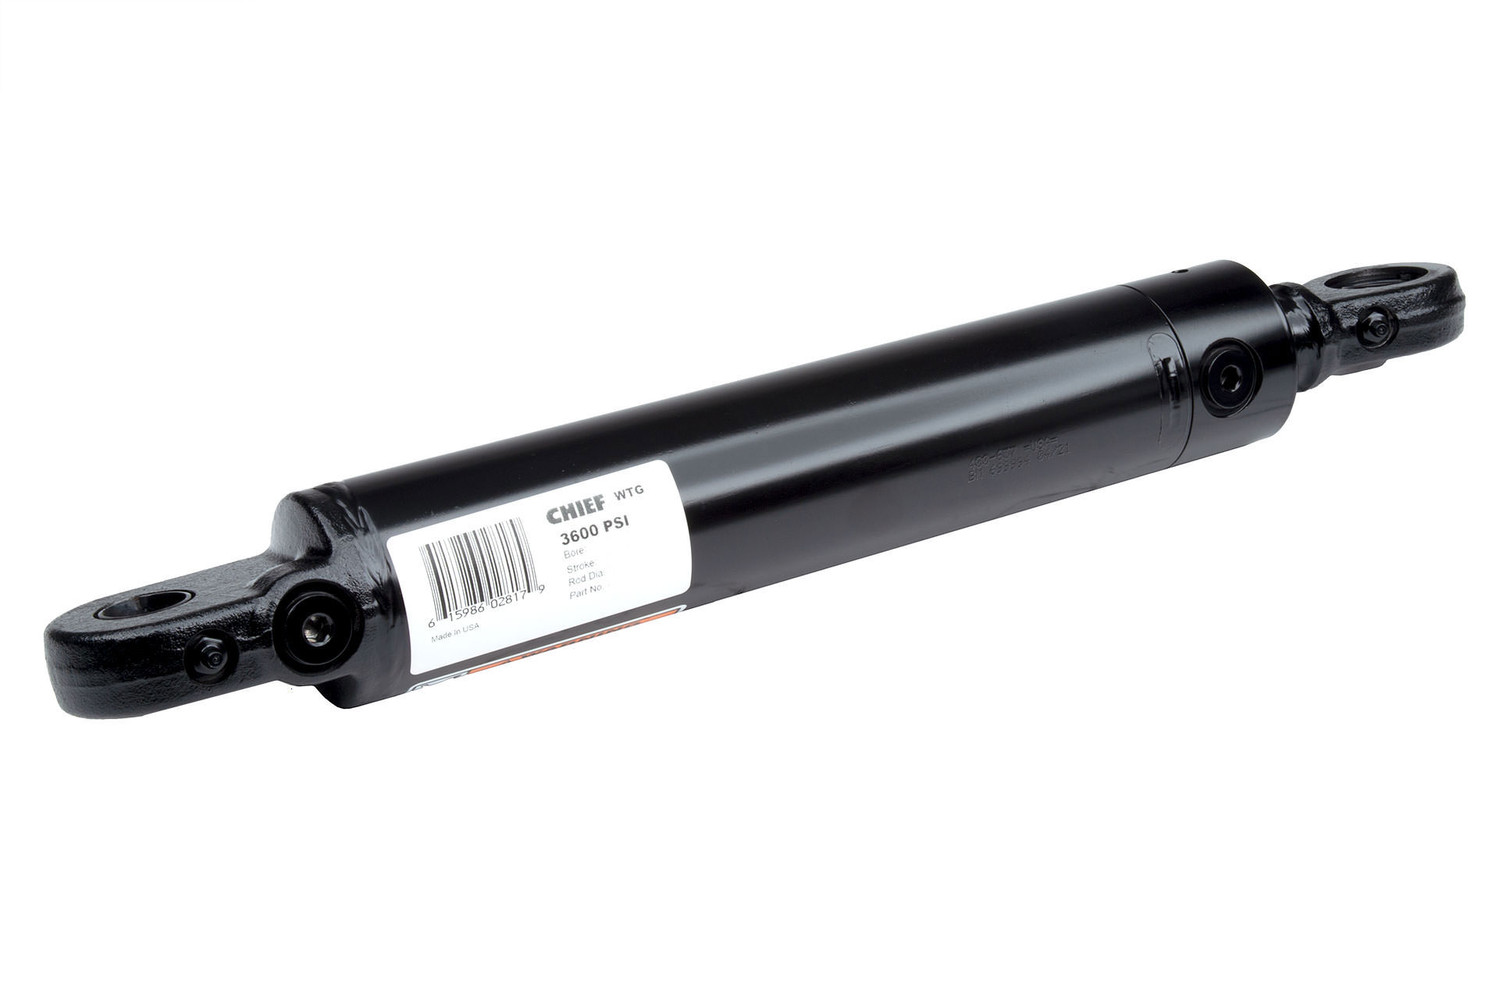 CHIEF WTG WELDED TANG HYDRAULIC CYLINDER: 3.5" BORE X 30" STROKE - 1.75" ROD